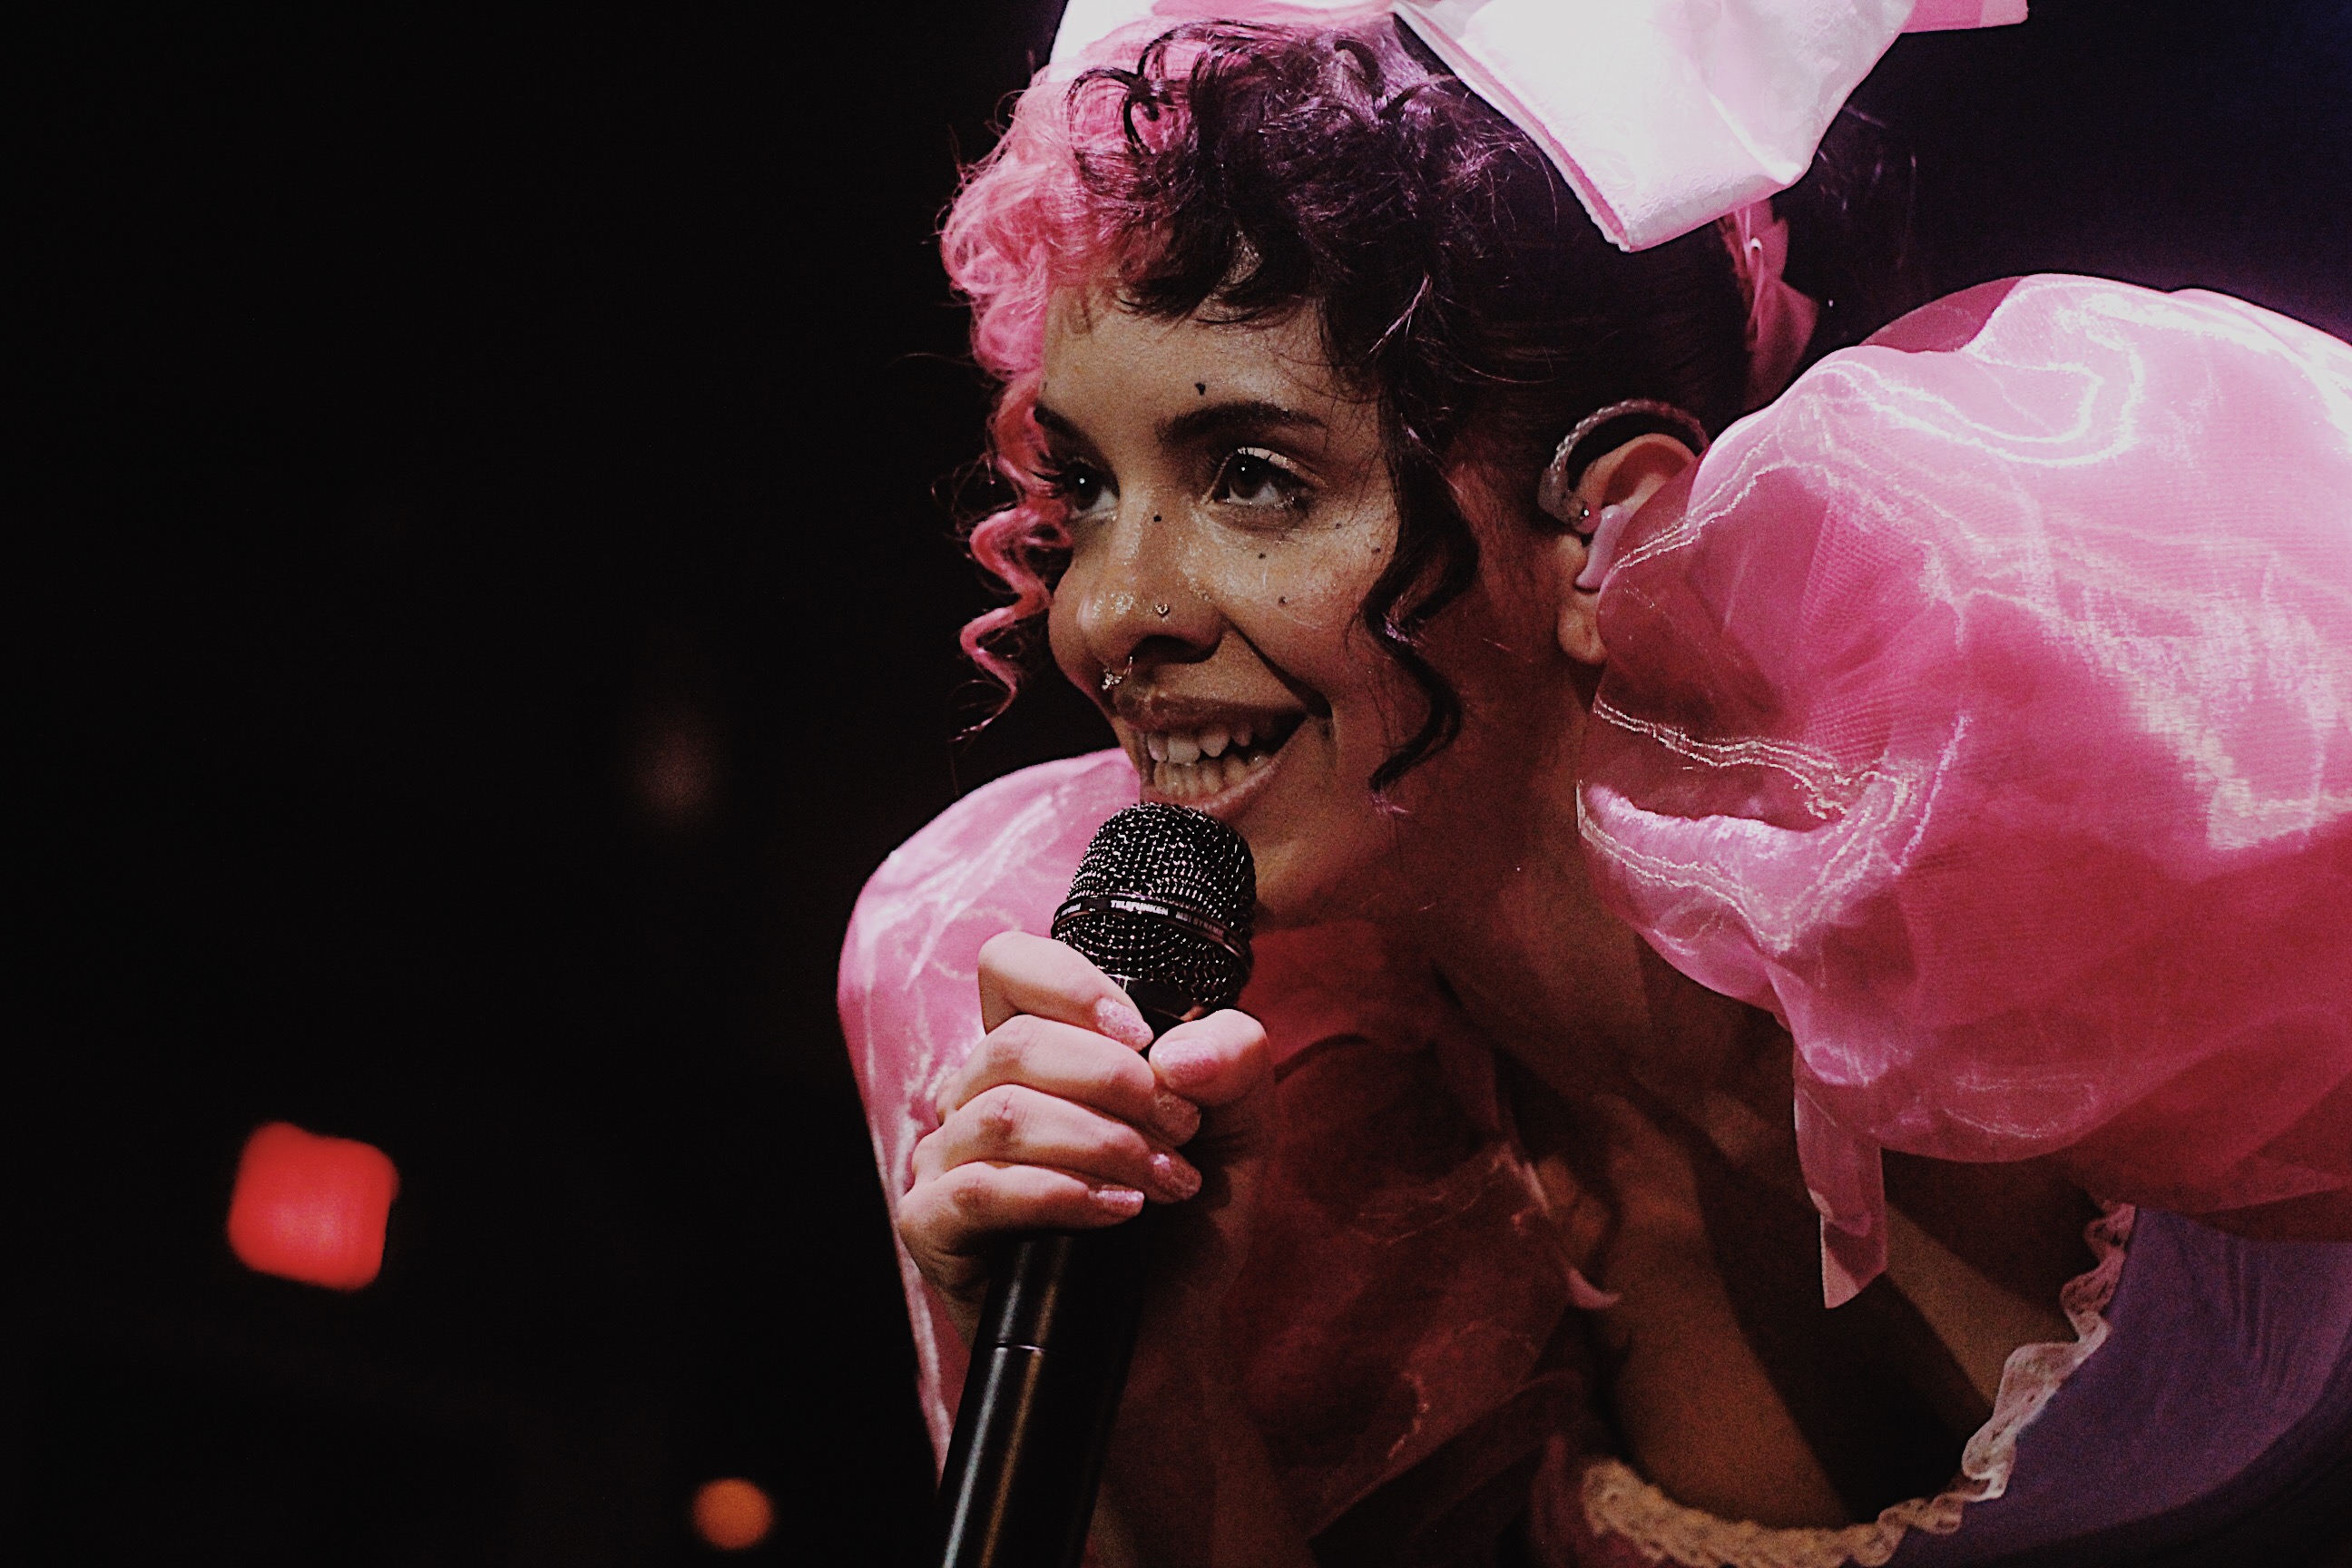 The cry baby effect: Melanie Martinez concert review